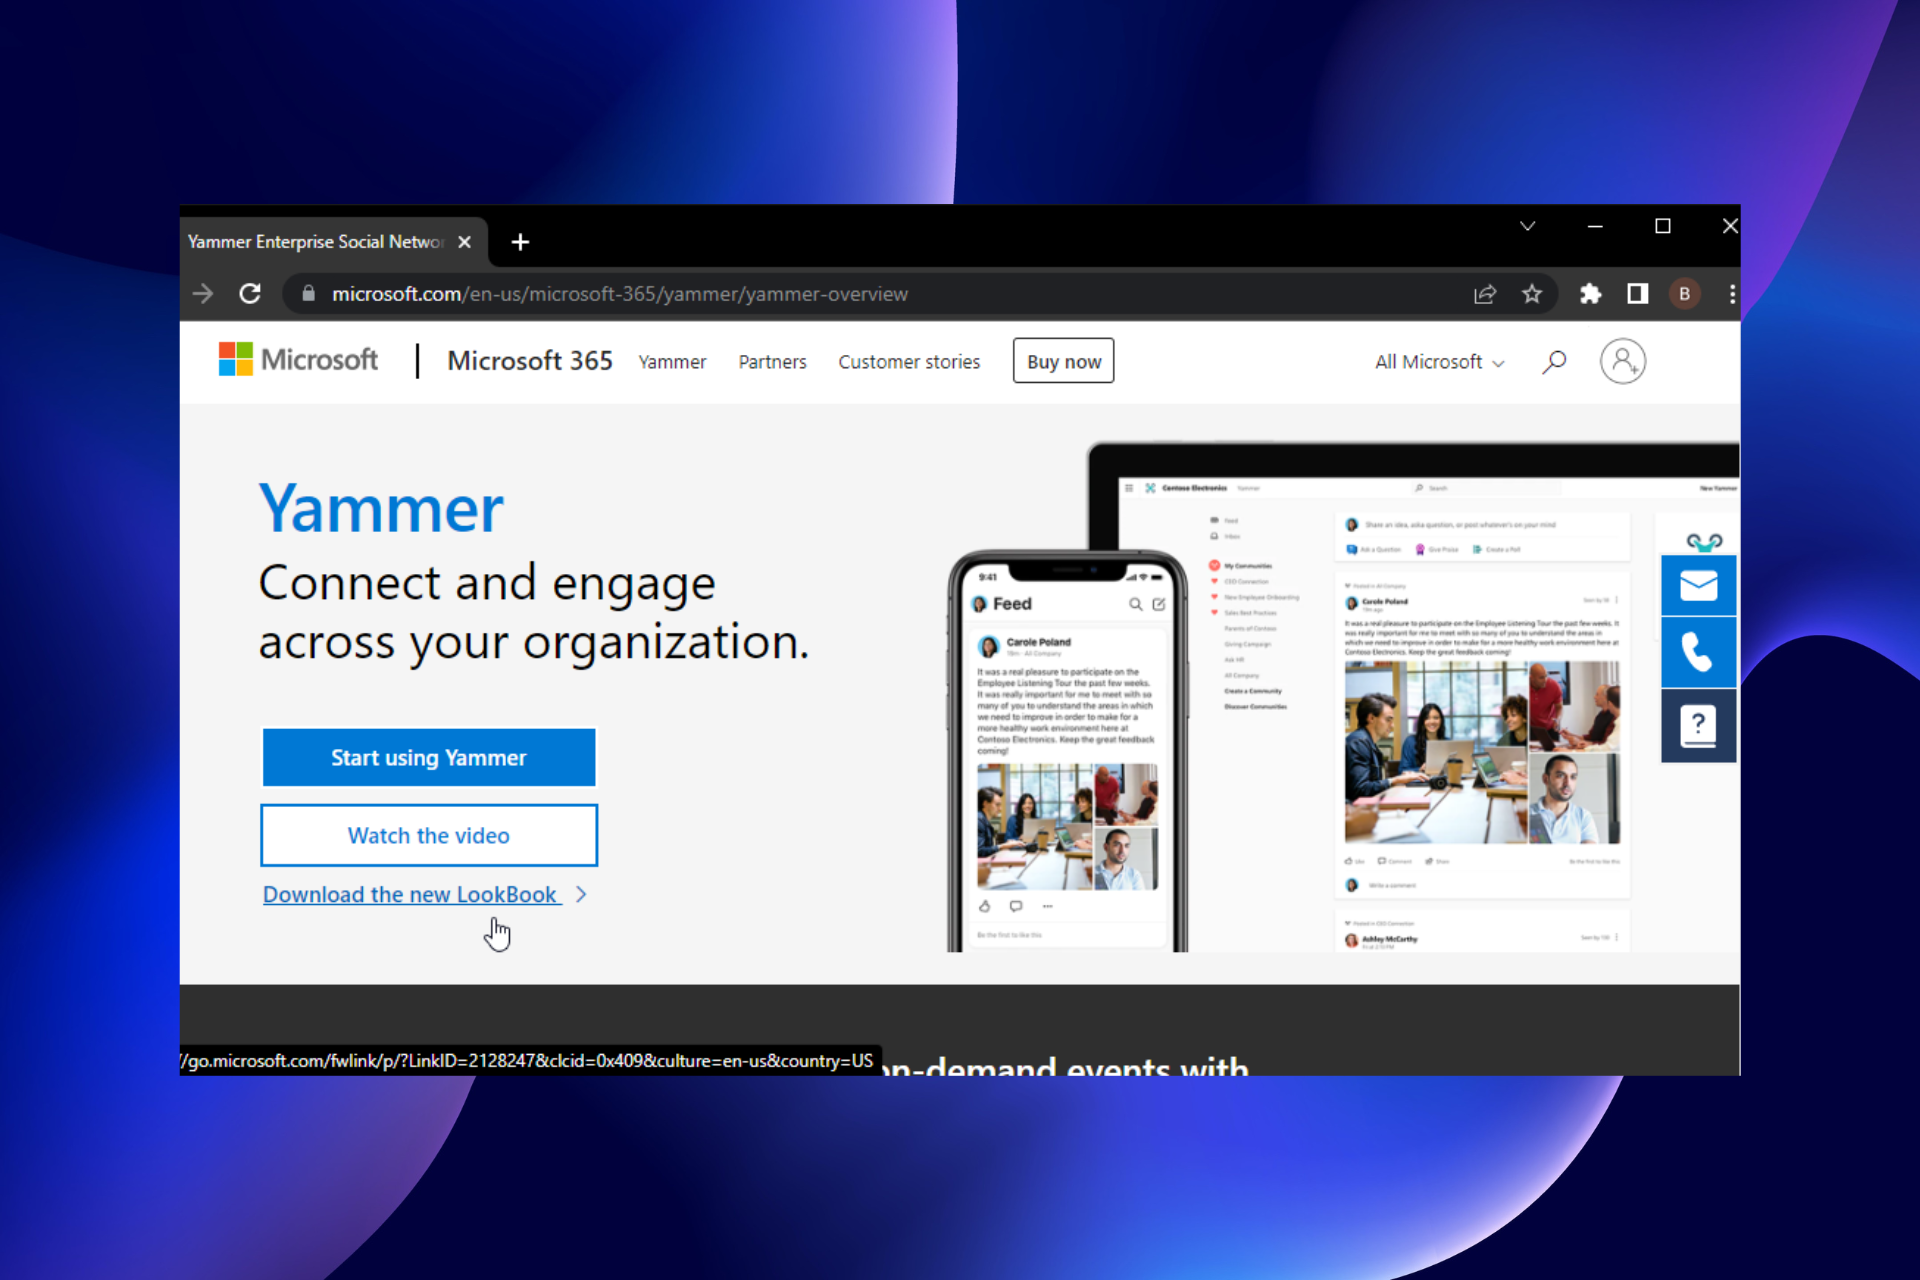 3 Ways to Fix Yammer if it’s not Working in Chrome